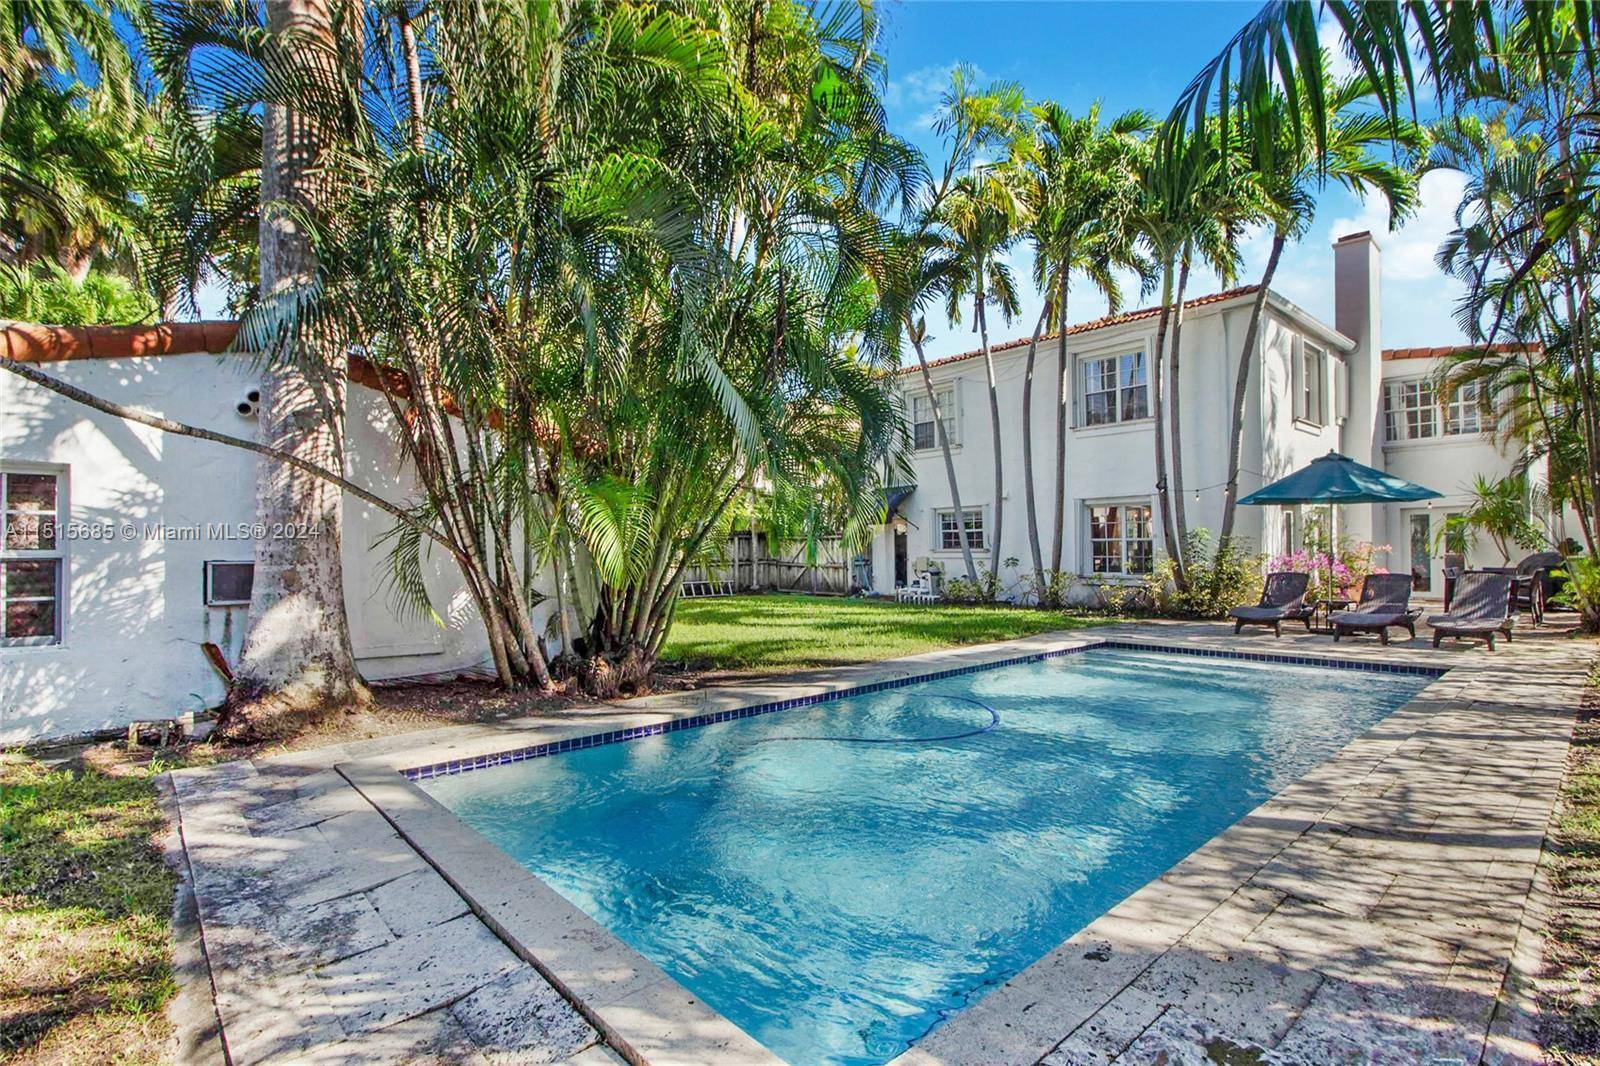 Furnished two story Florida Mediterranean bursting with classic charm.